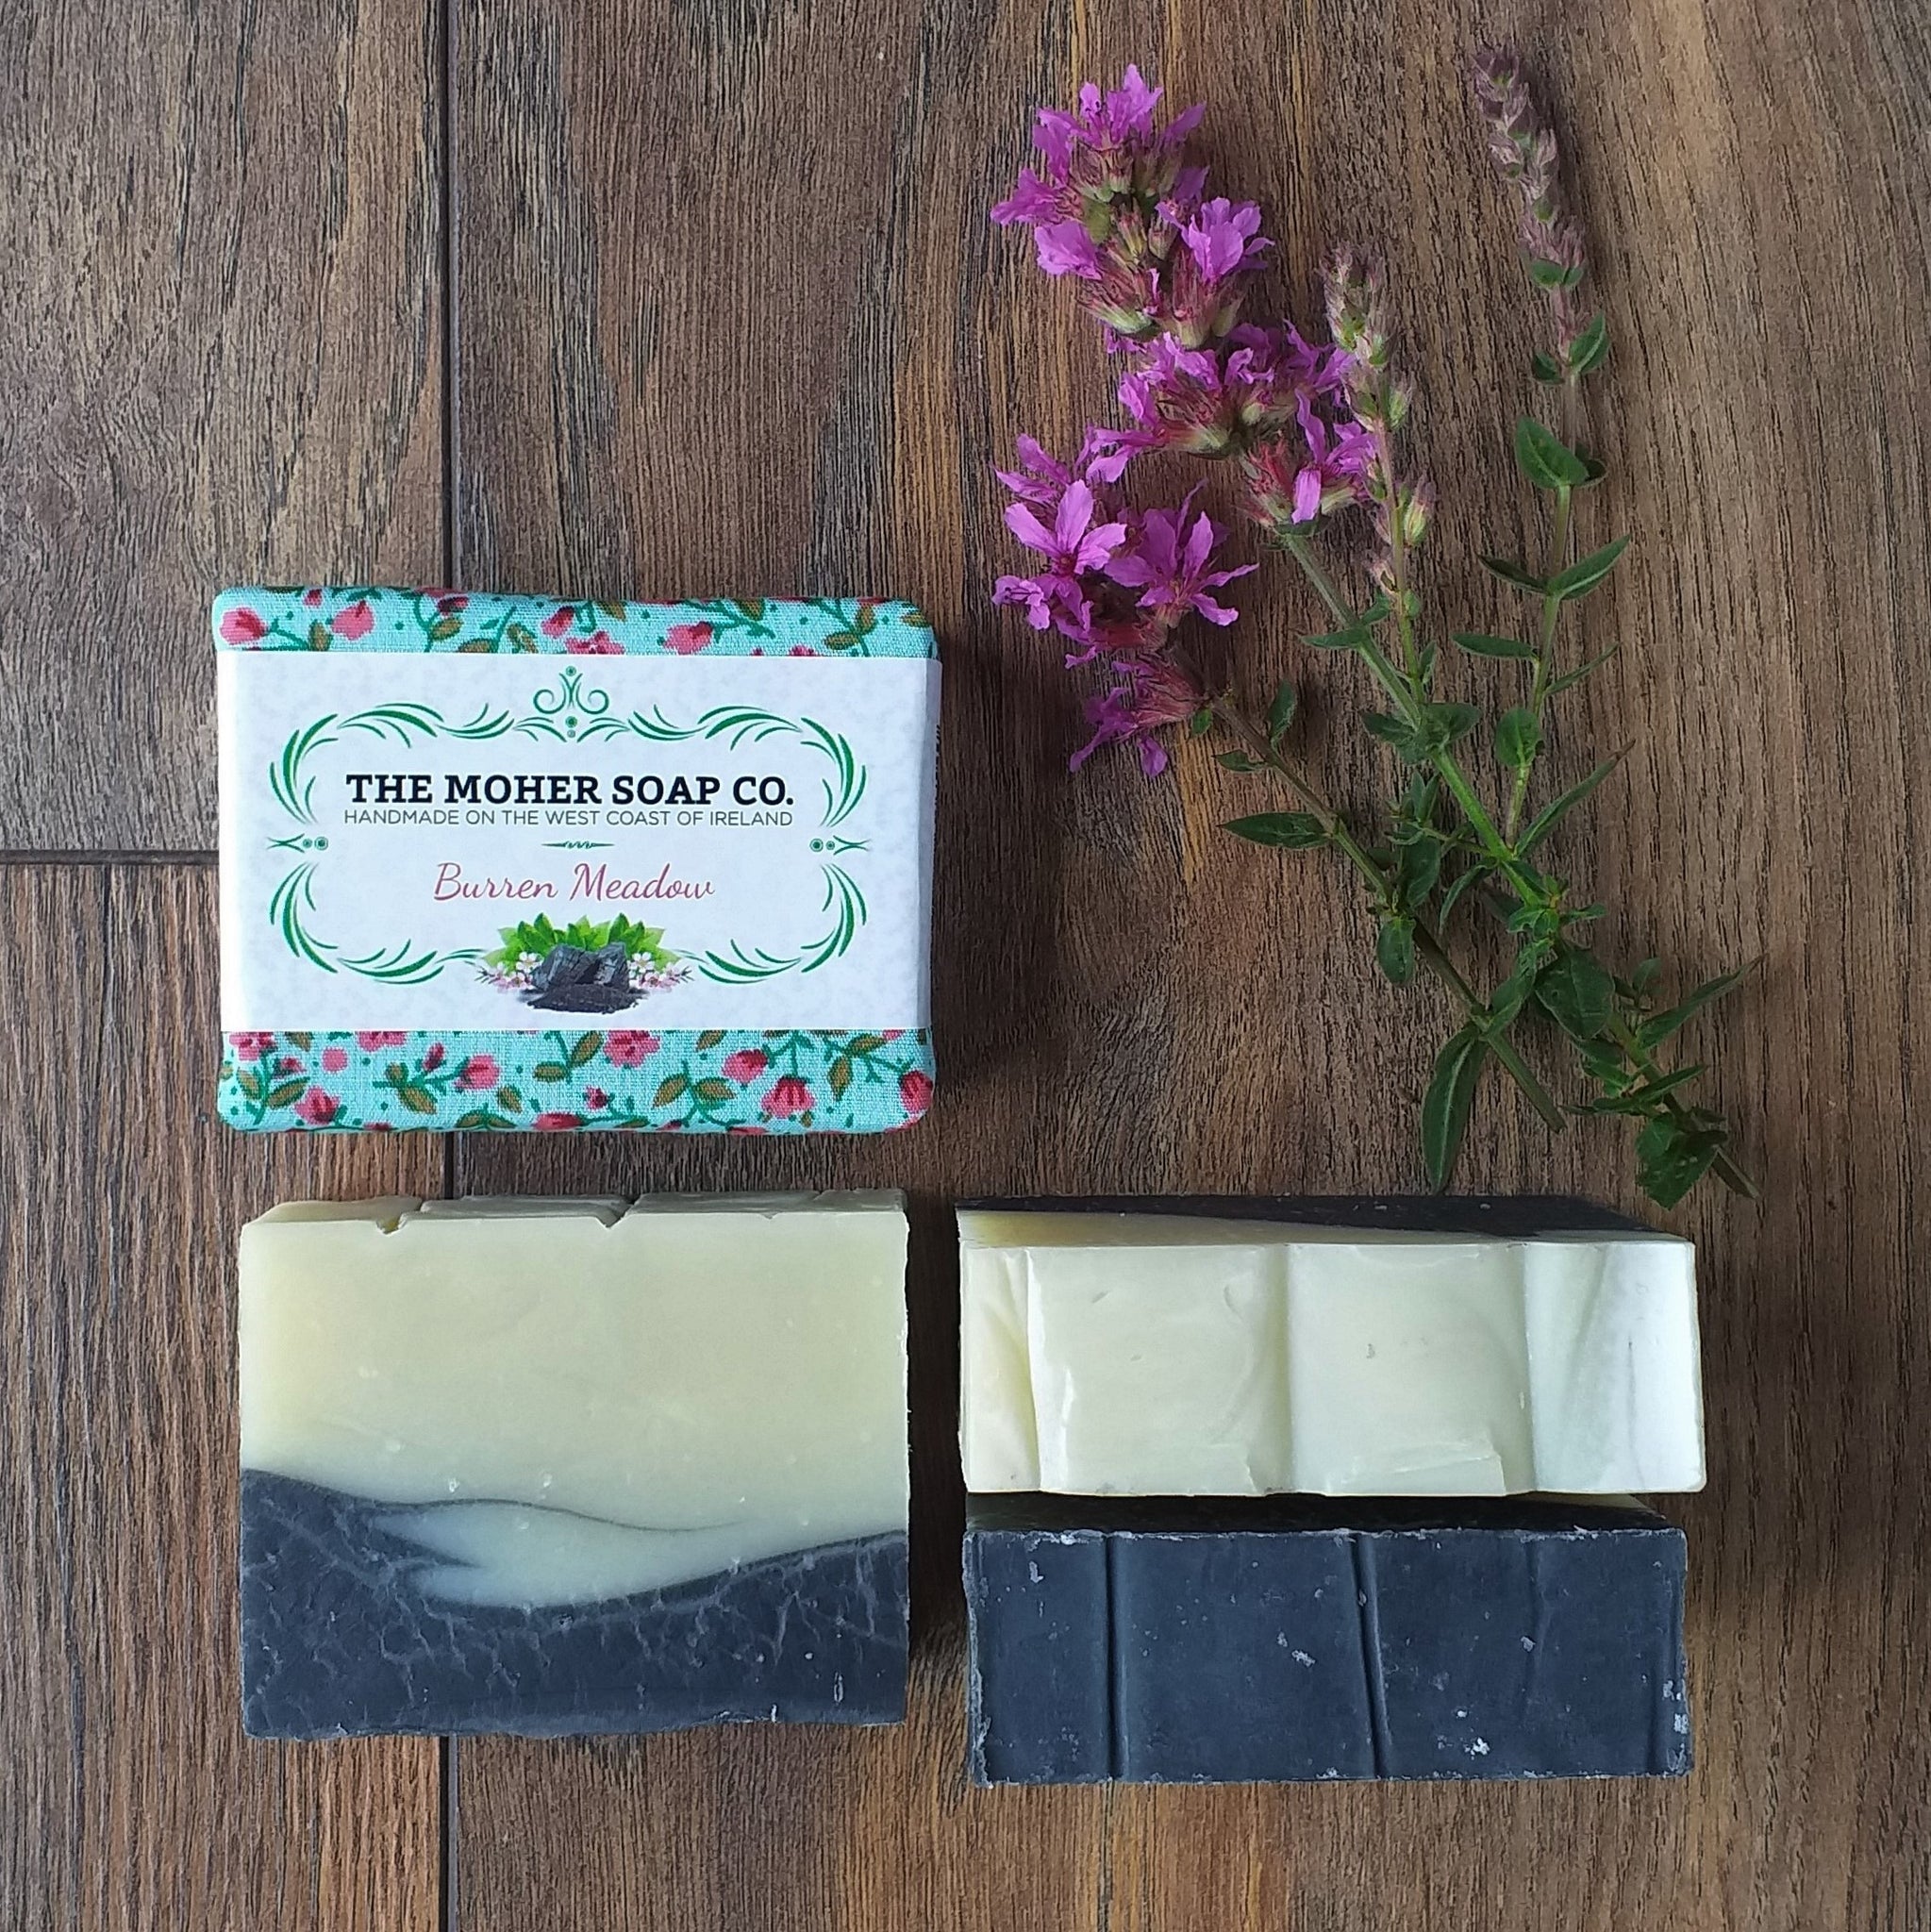 The Moher Soap Co. Burren Meadow Natural Soap